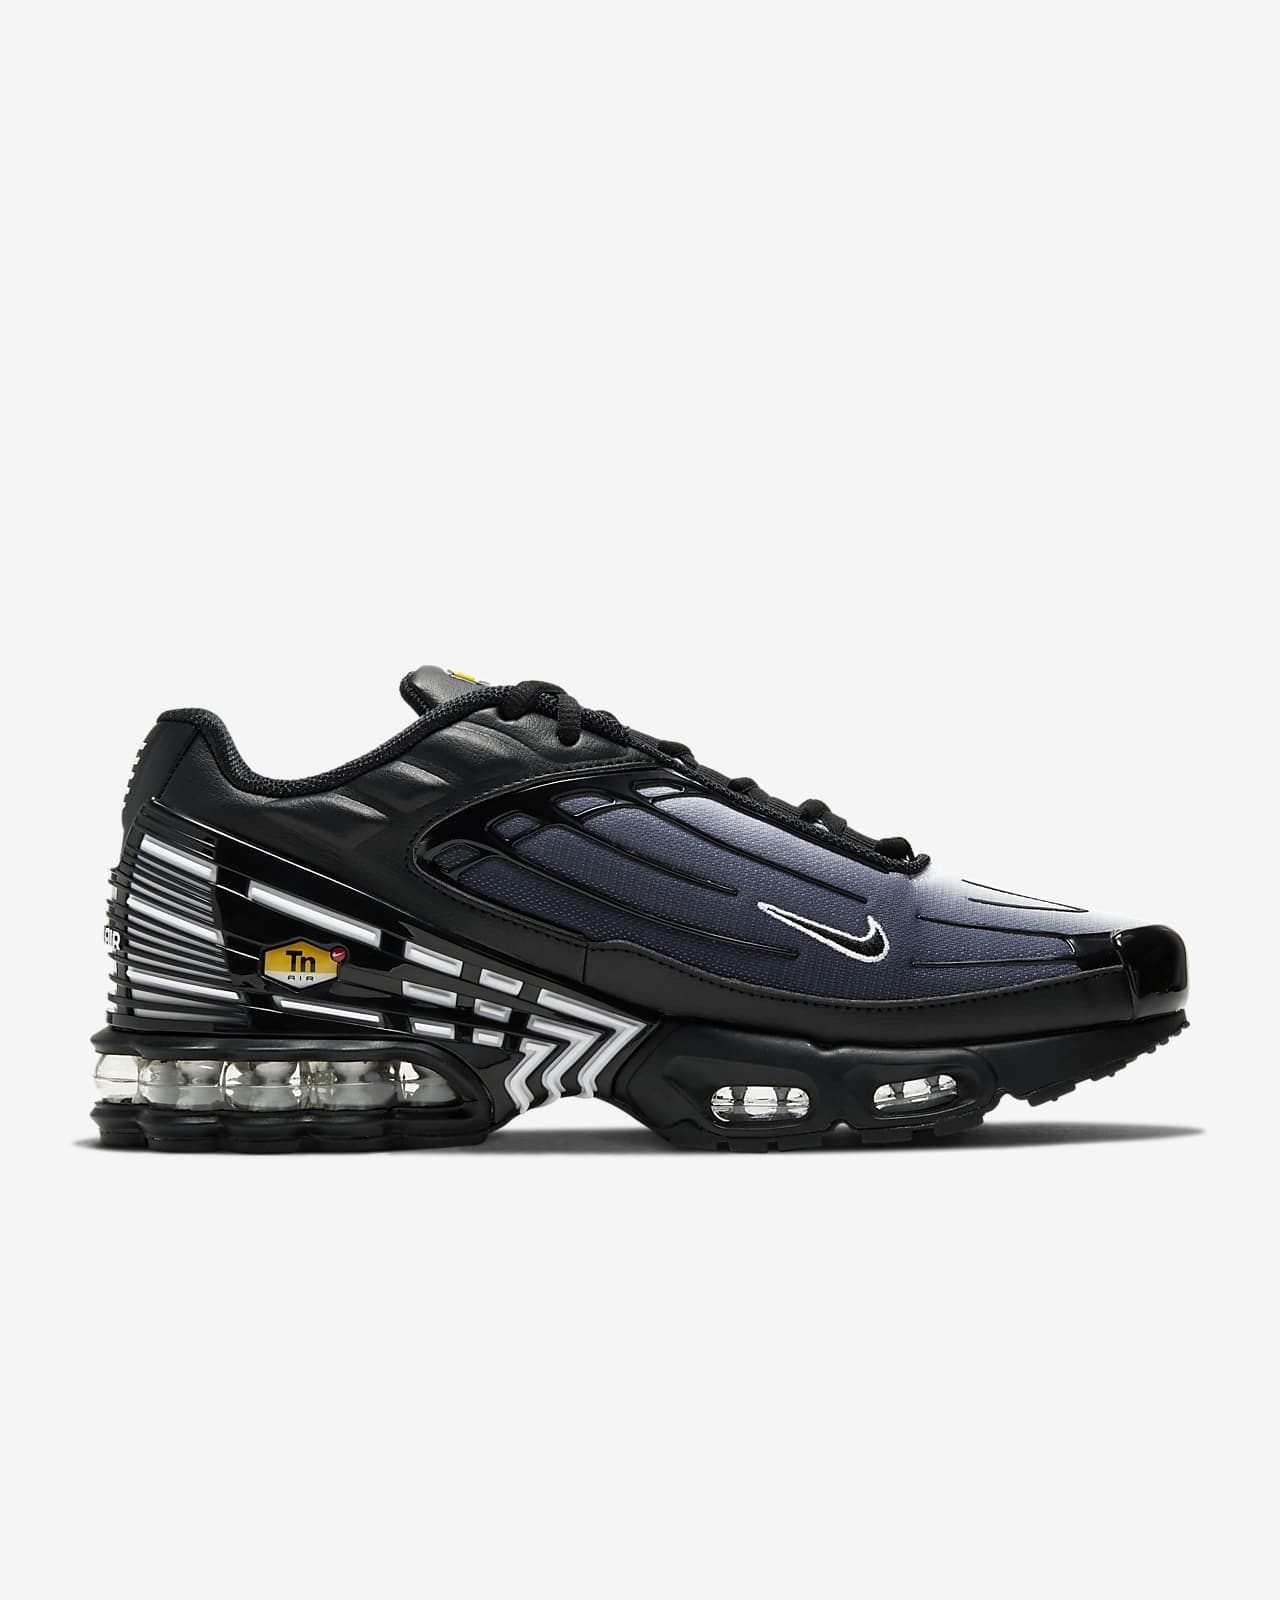 Nike Air Max Tn Plus Clearance Sale, UP TO 66% OFF